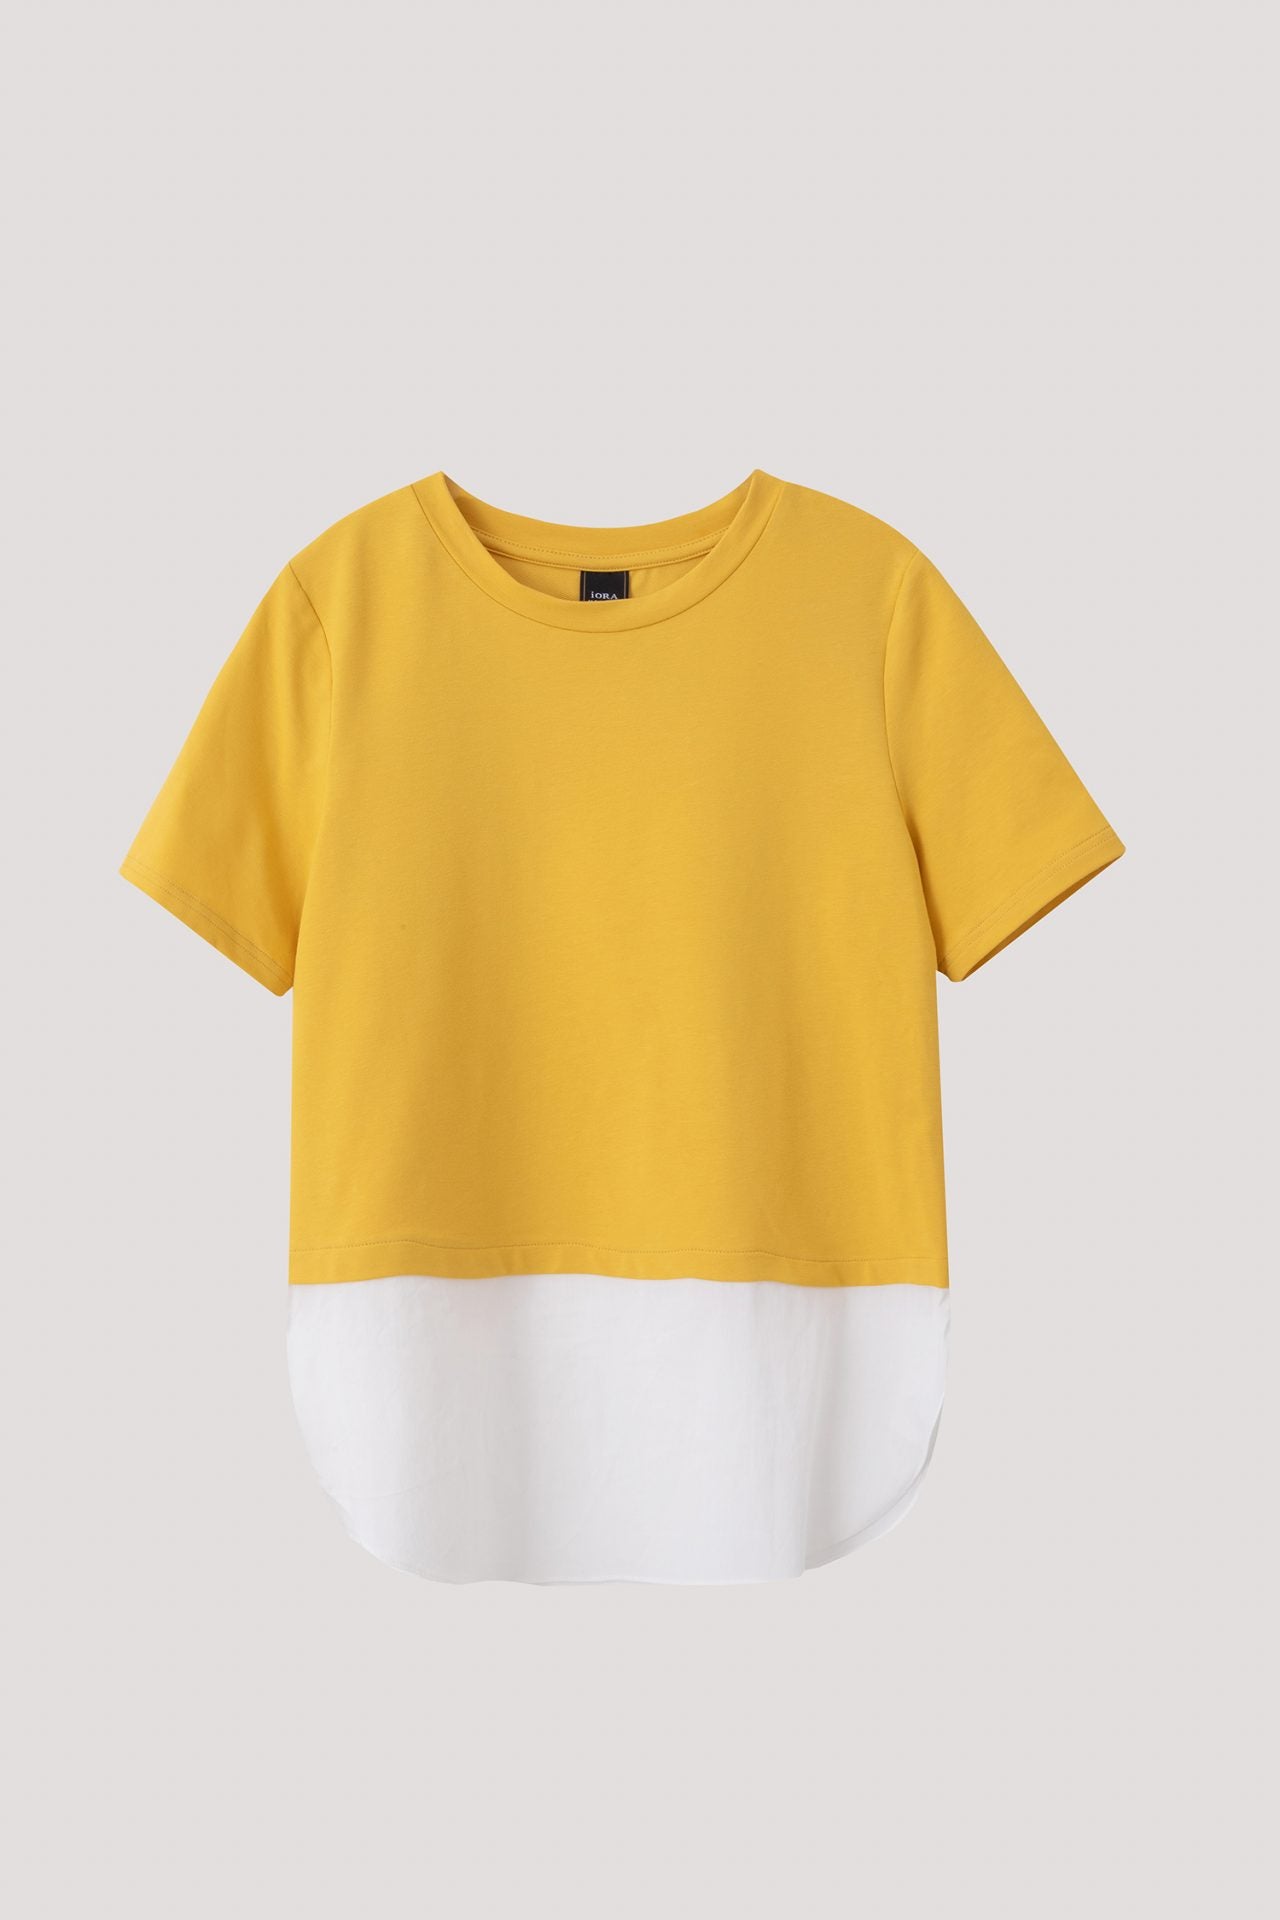 AT 10936 CONTRAST TOP YELLOW